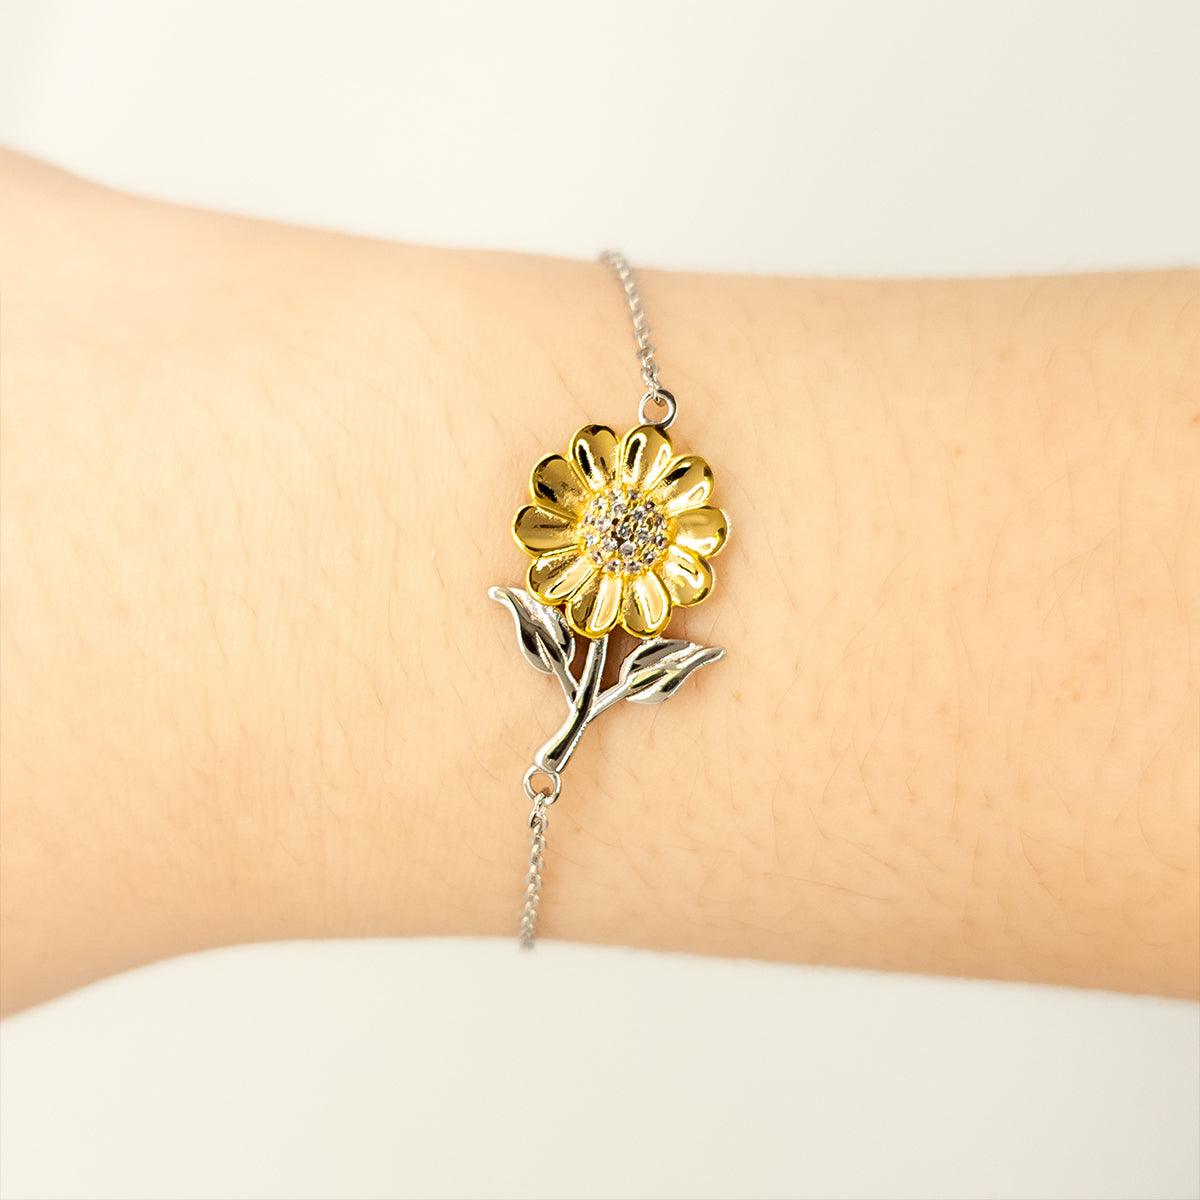 Grandmother Gifts, To My Grandmother Remember, you will never lose. You will either WIN or LEARN, Keepsake Sunflower Bracelet For Grandmother Card, Birthday Christmas Gifts Ideas For Grandmother X-mas Gifts